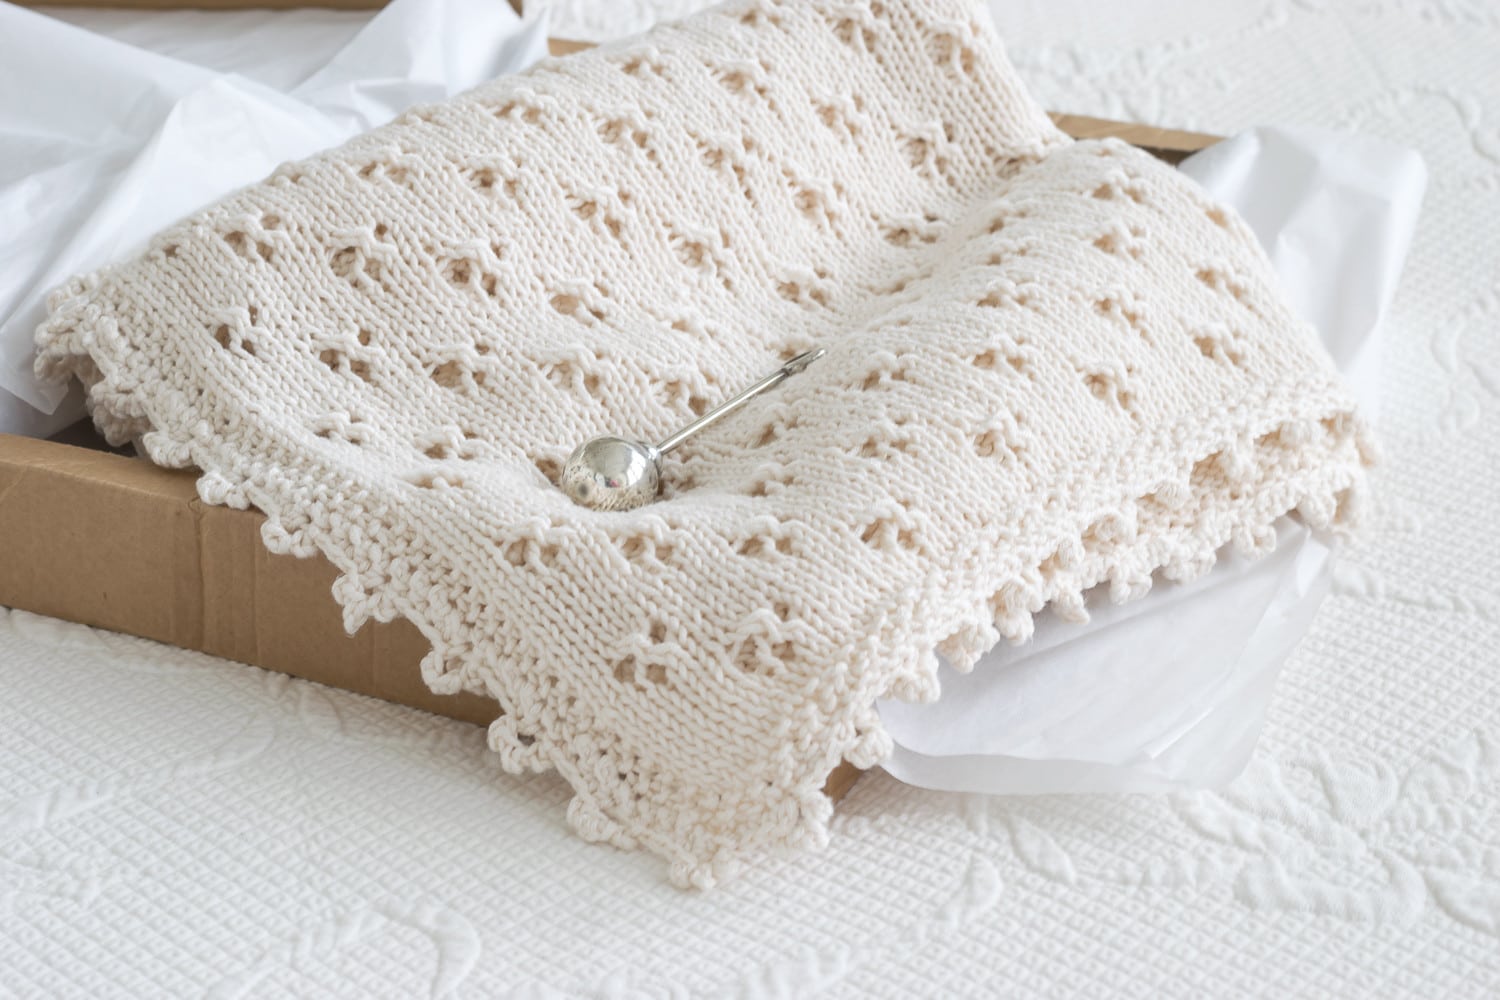 I am head over heels in love with this precious baby blanket. Pattern and instructions on how to make this knit baby blanket using the clover eyelet and crocheted cloverleaf border, with videos to provide further instructions to diy this sweet baby blanket.